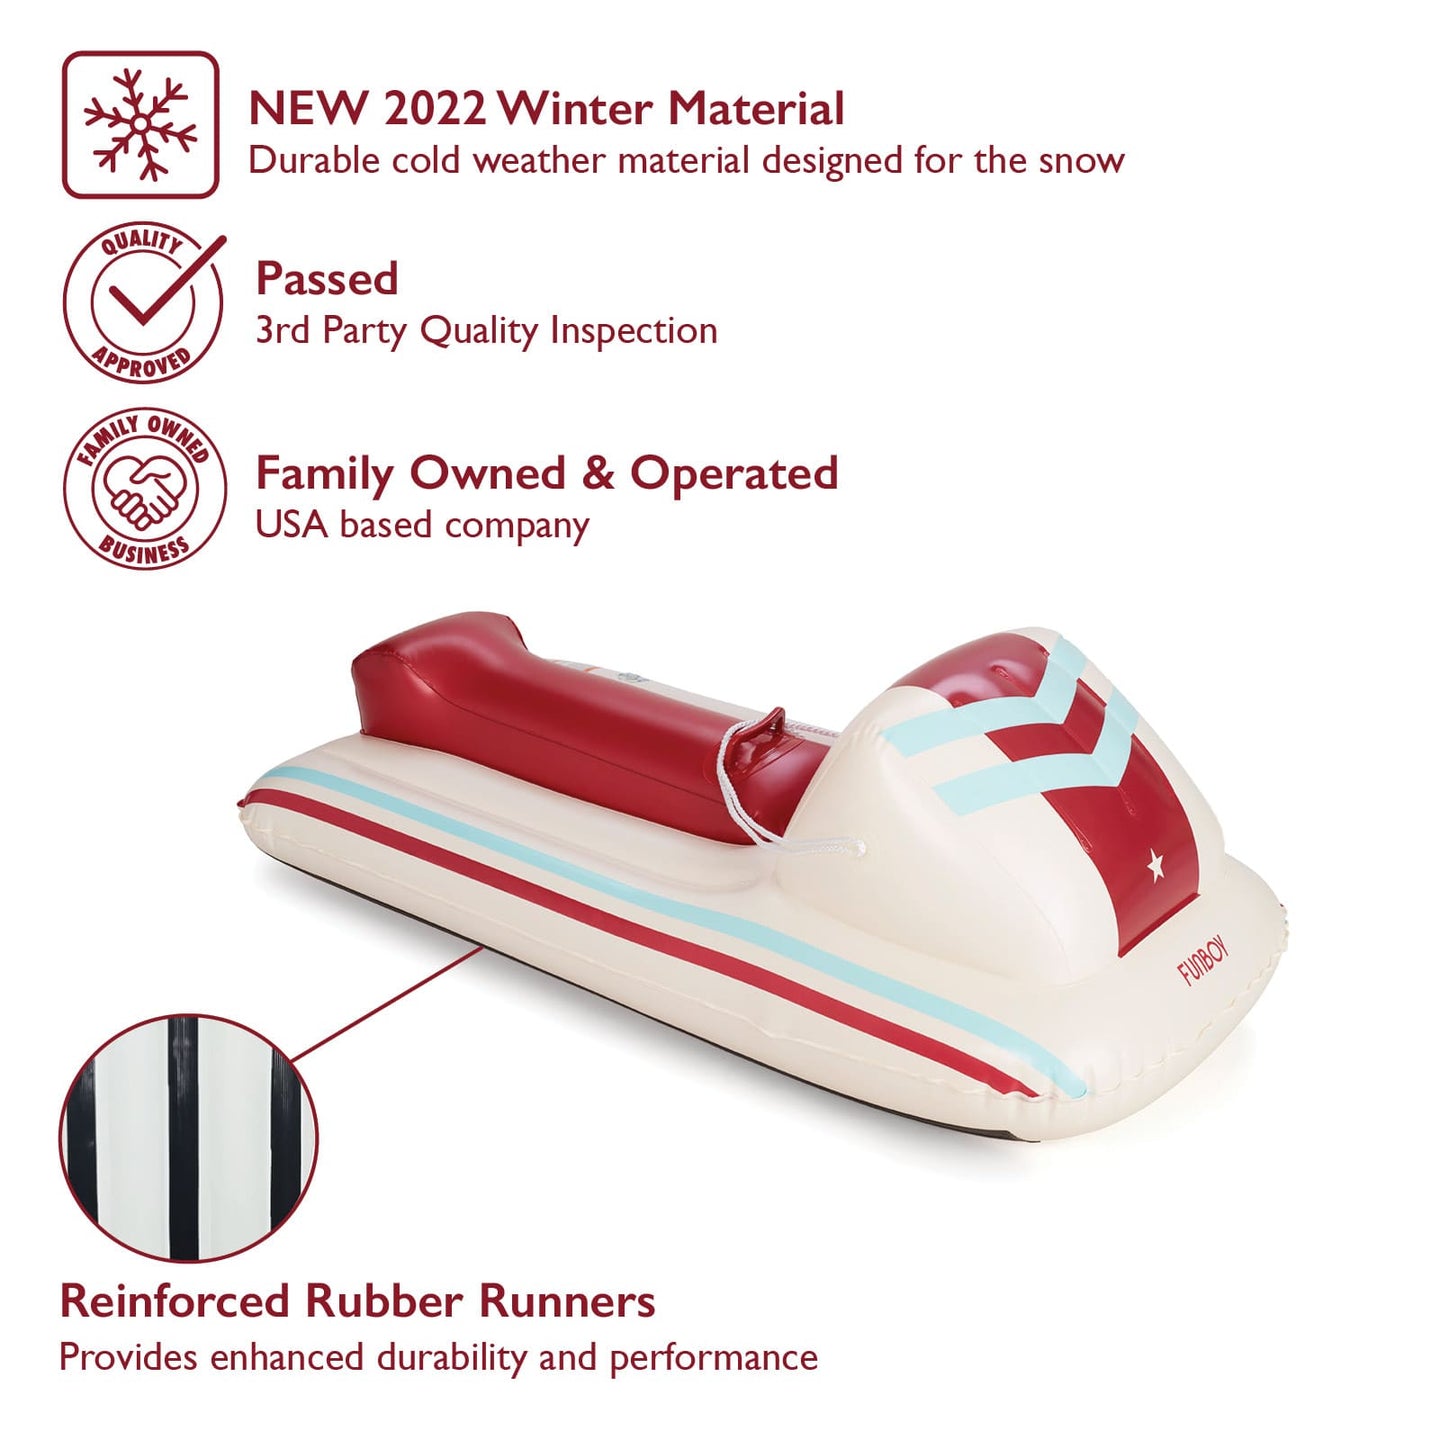 FUNBOY Winter Sled. New 2022 Winter Material. Durable cold weather material designed for snow. Passed 3rd Party Quality Inspection. Family Owned and Operated. USA Based. 2 Layer Bottom provides enhanced durability and performance